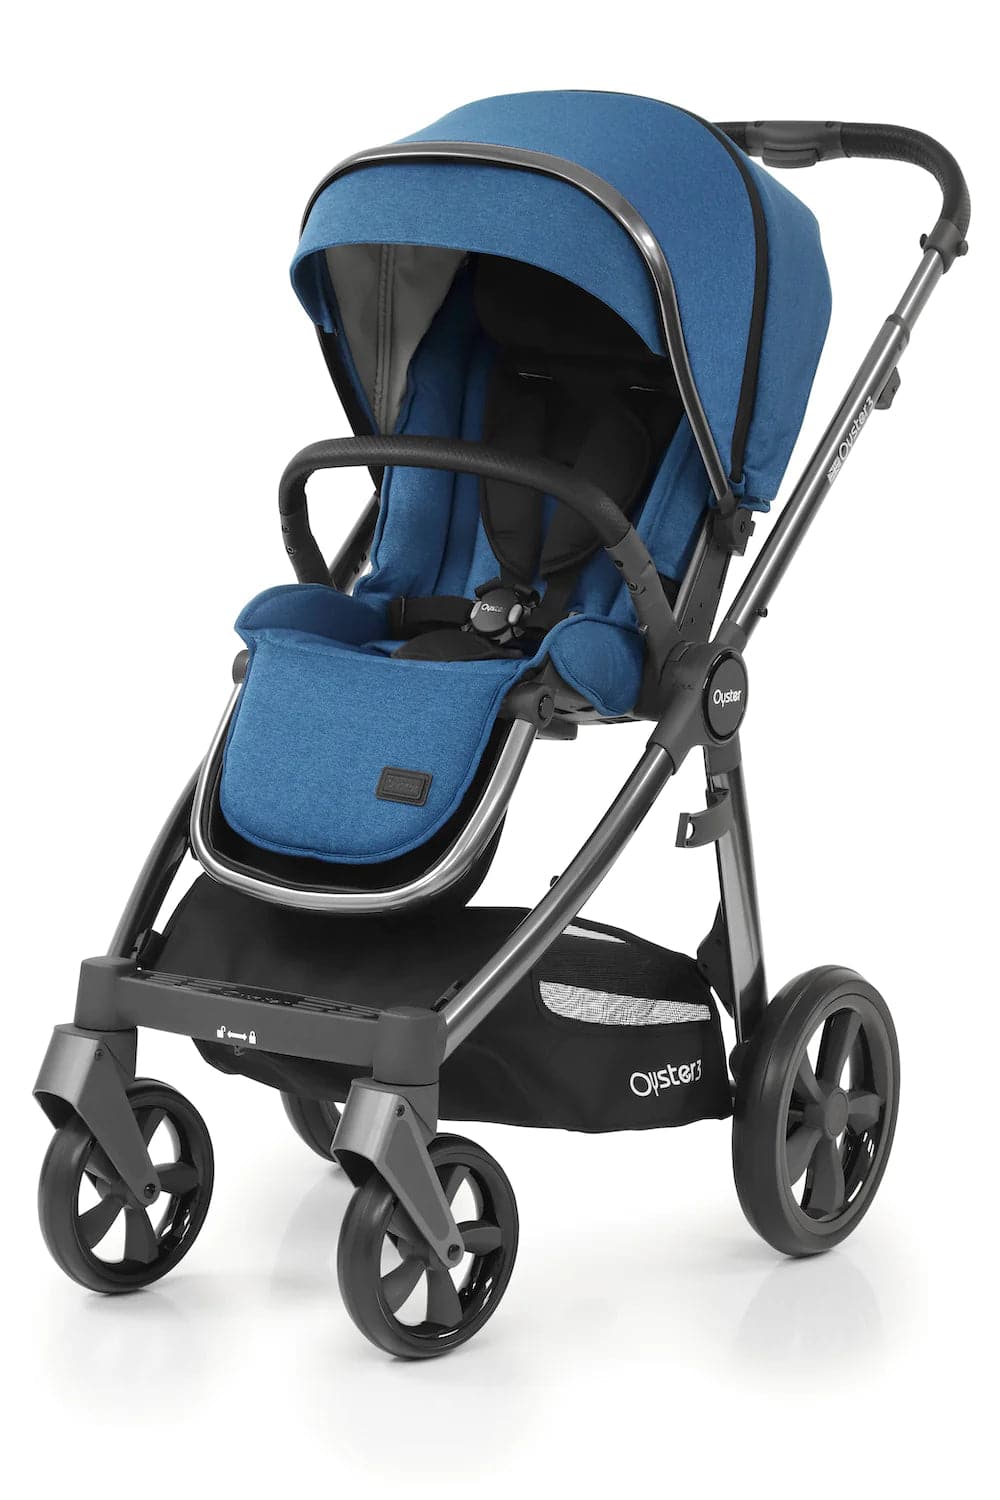 BabyStyle Oyster 3 Pushchair - Kingfisher - For Your Little One